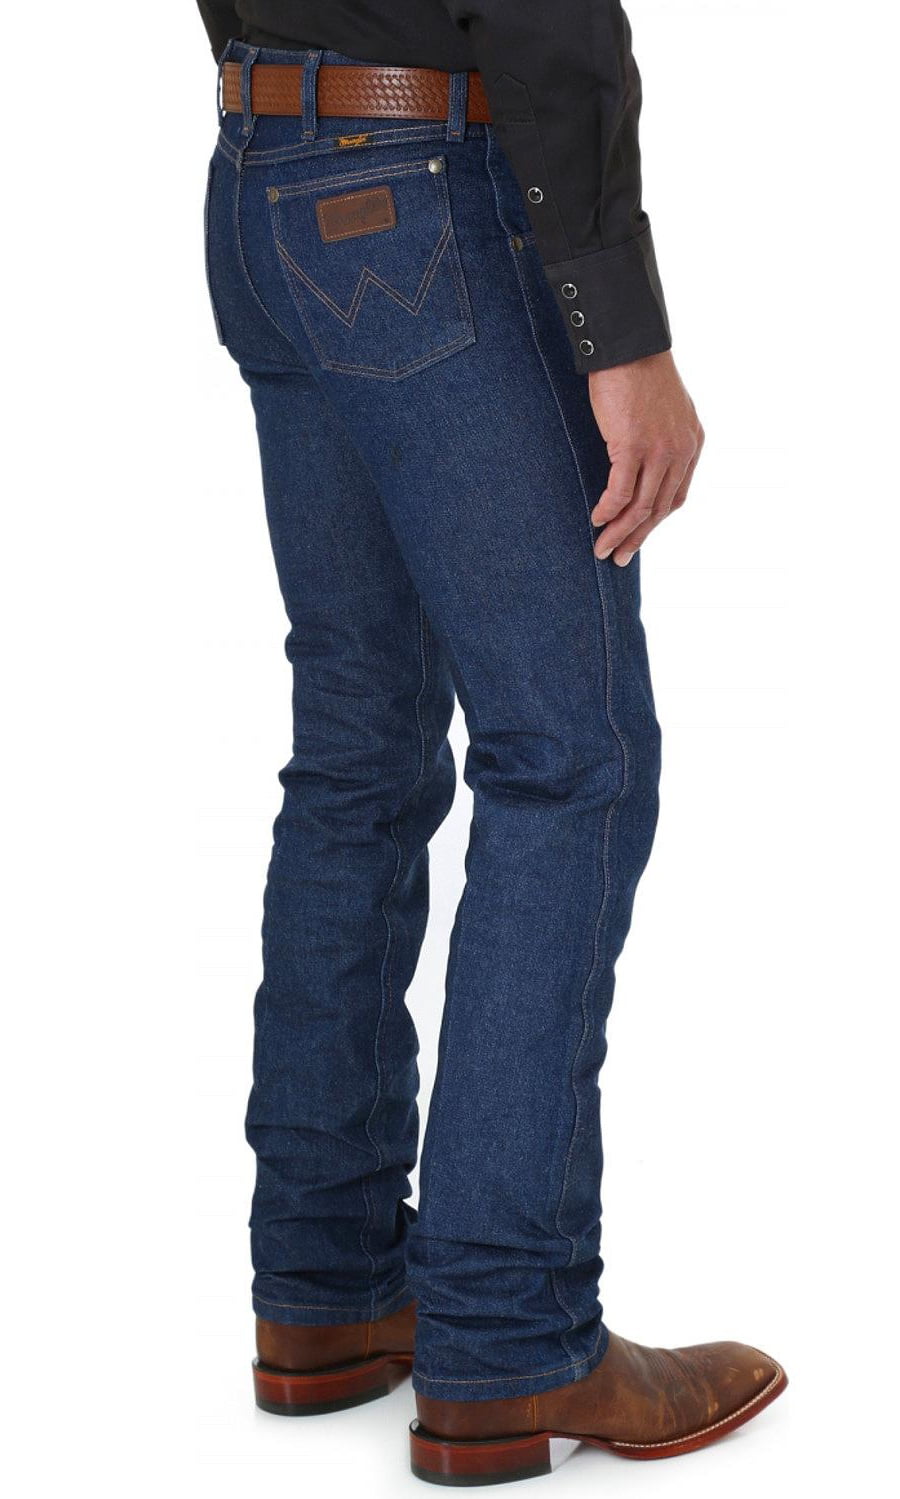 jeans ankle skinny